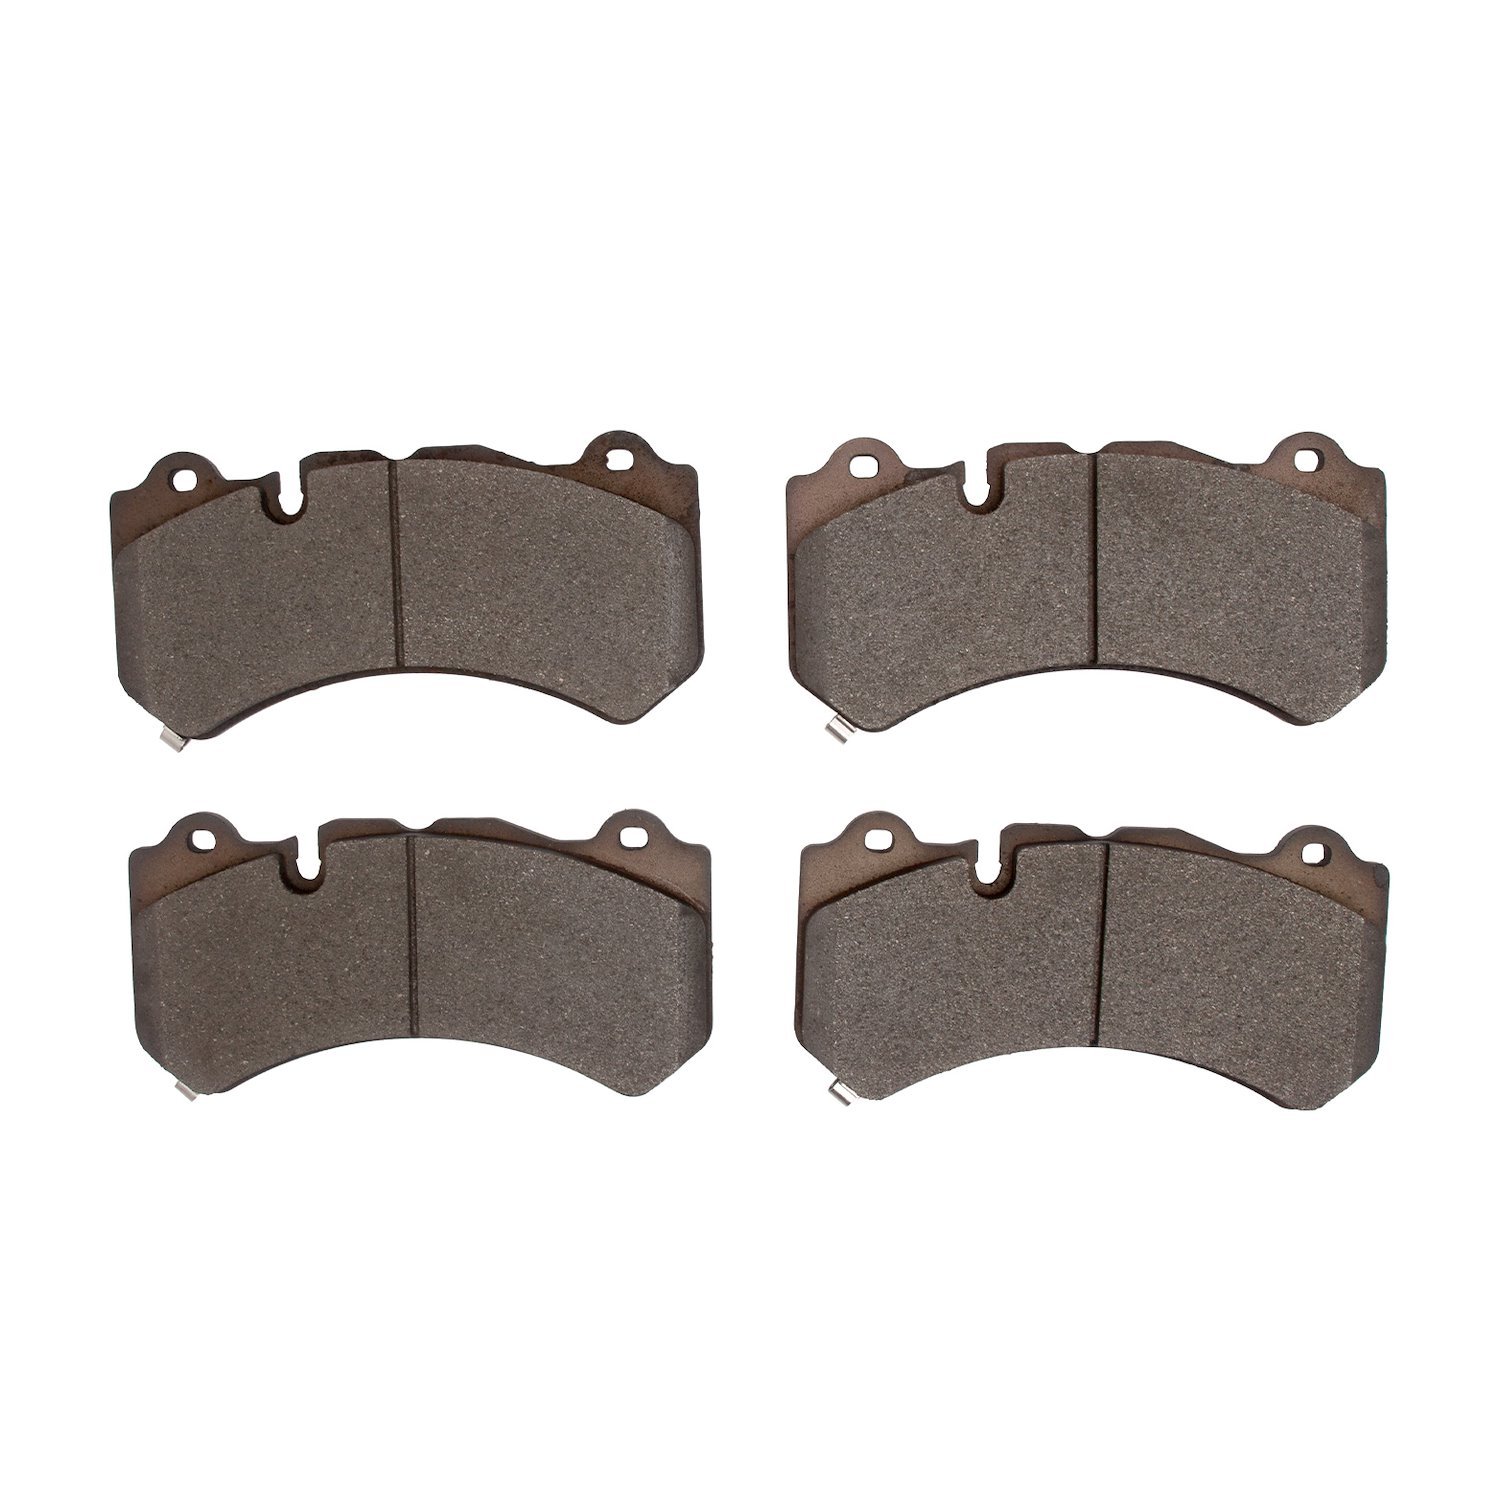 1551-2444-00 5000 Advanced Low-Metallic Brake Pads, Fits Select GM, Position: Front